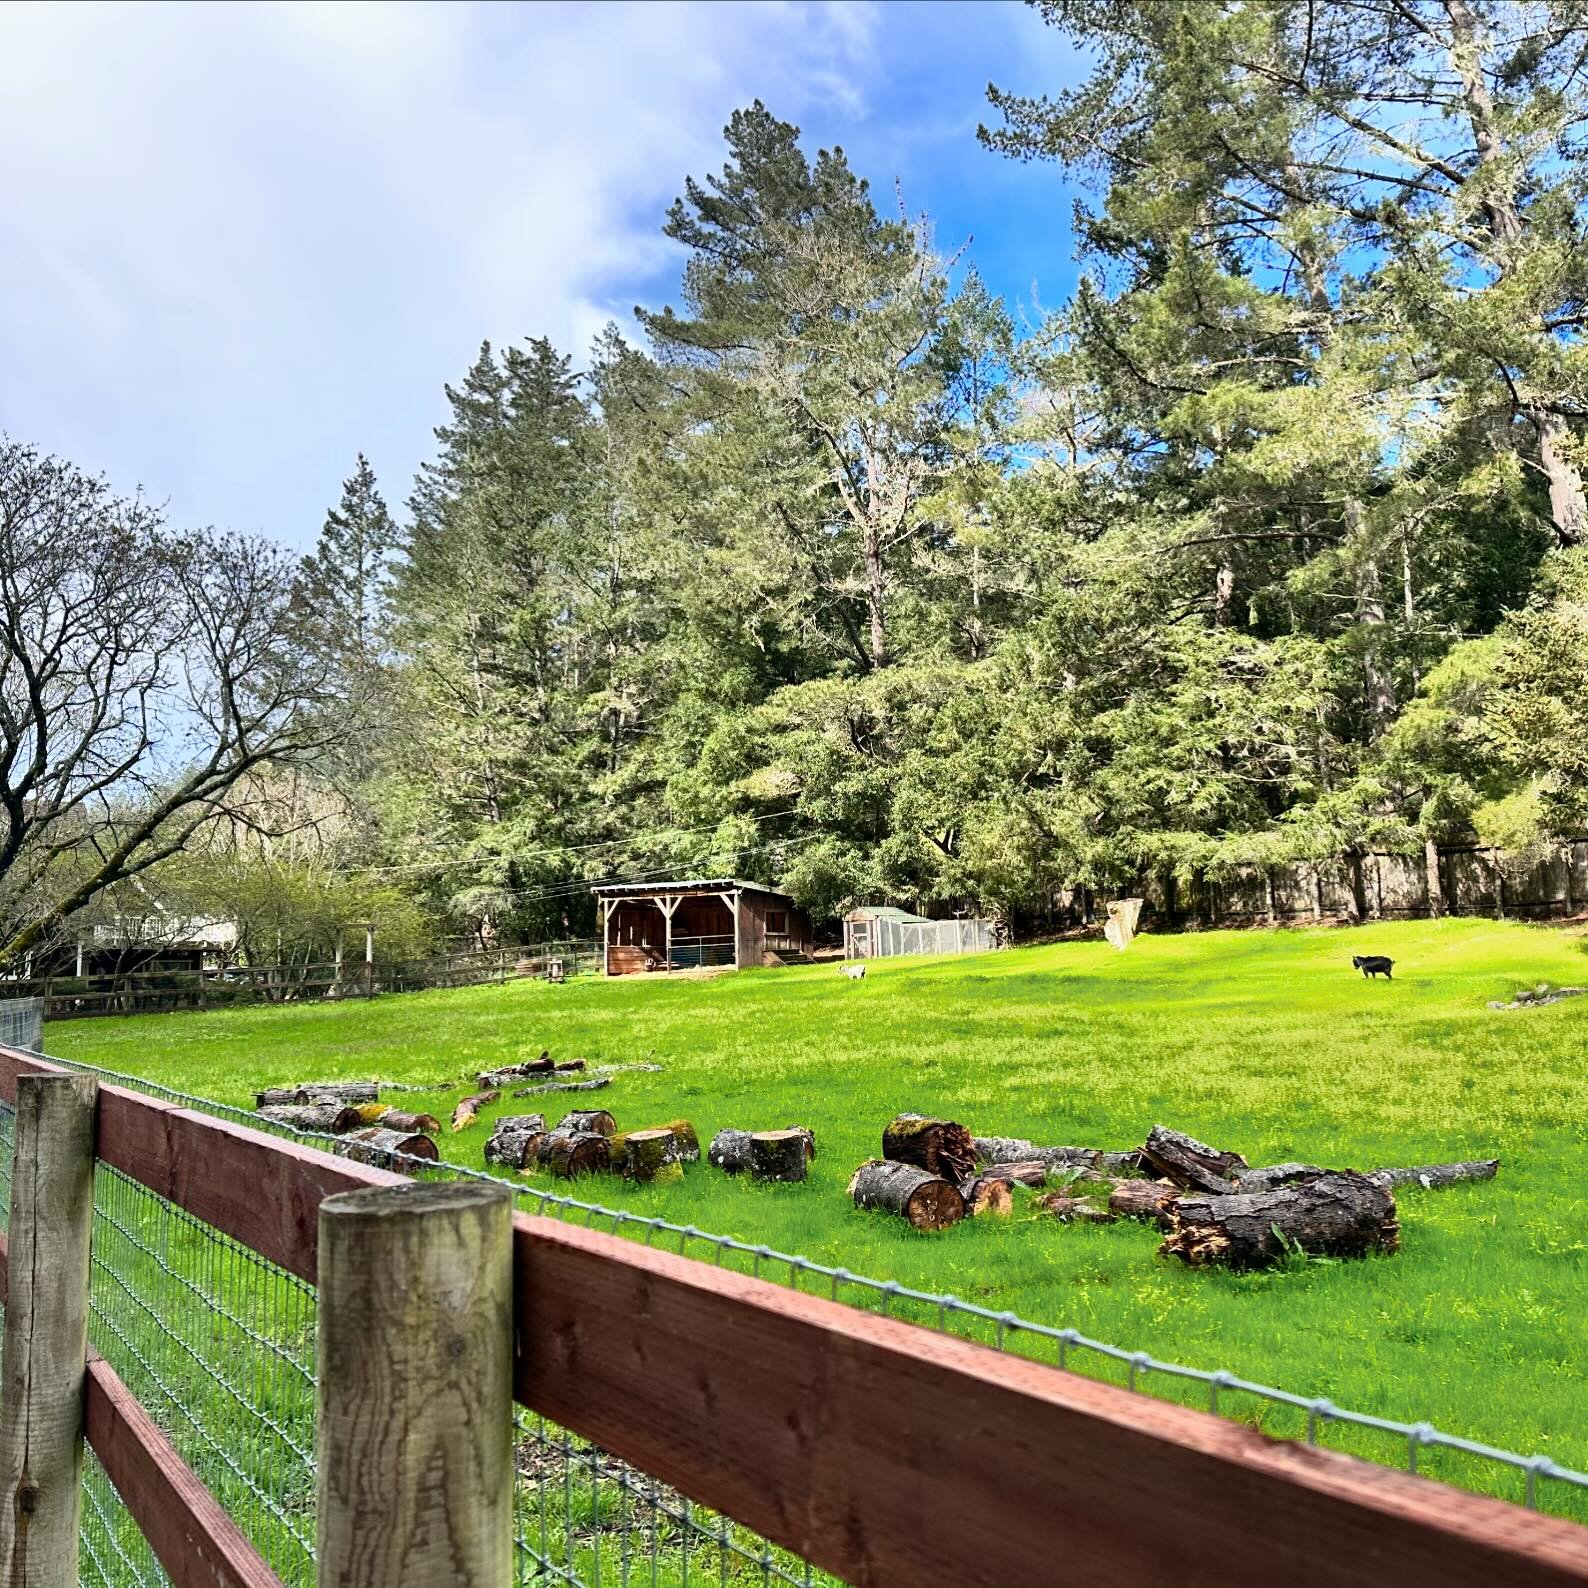 #JUSTSOLD | Gorgeous 4 acre property along Lucas Valley Road in #Nicasio. This estate includes a beautiful 5 bedroom home with attached ADU, pool, hot tub and separate cottage. Ample natural light with space to grow food, garden and raise animals or 